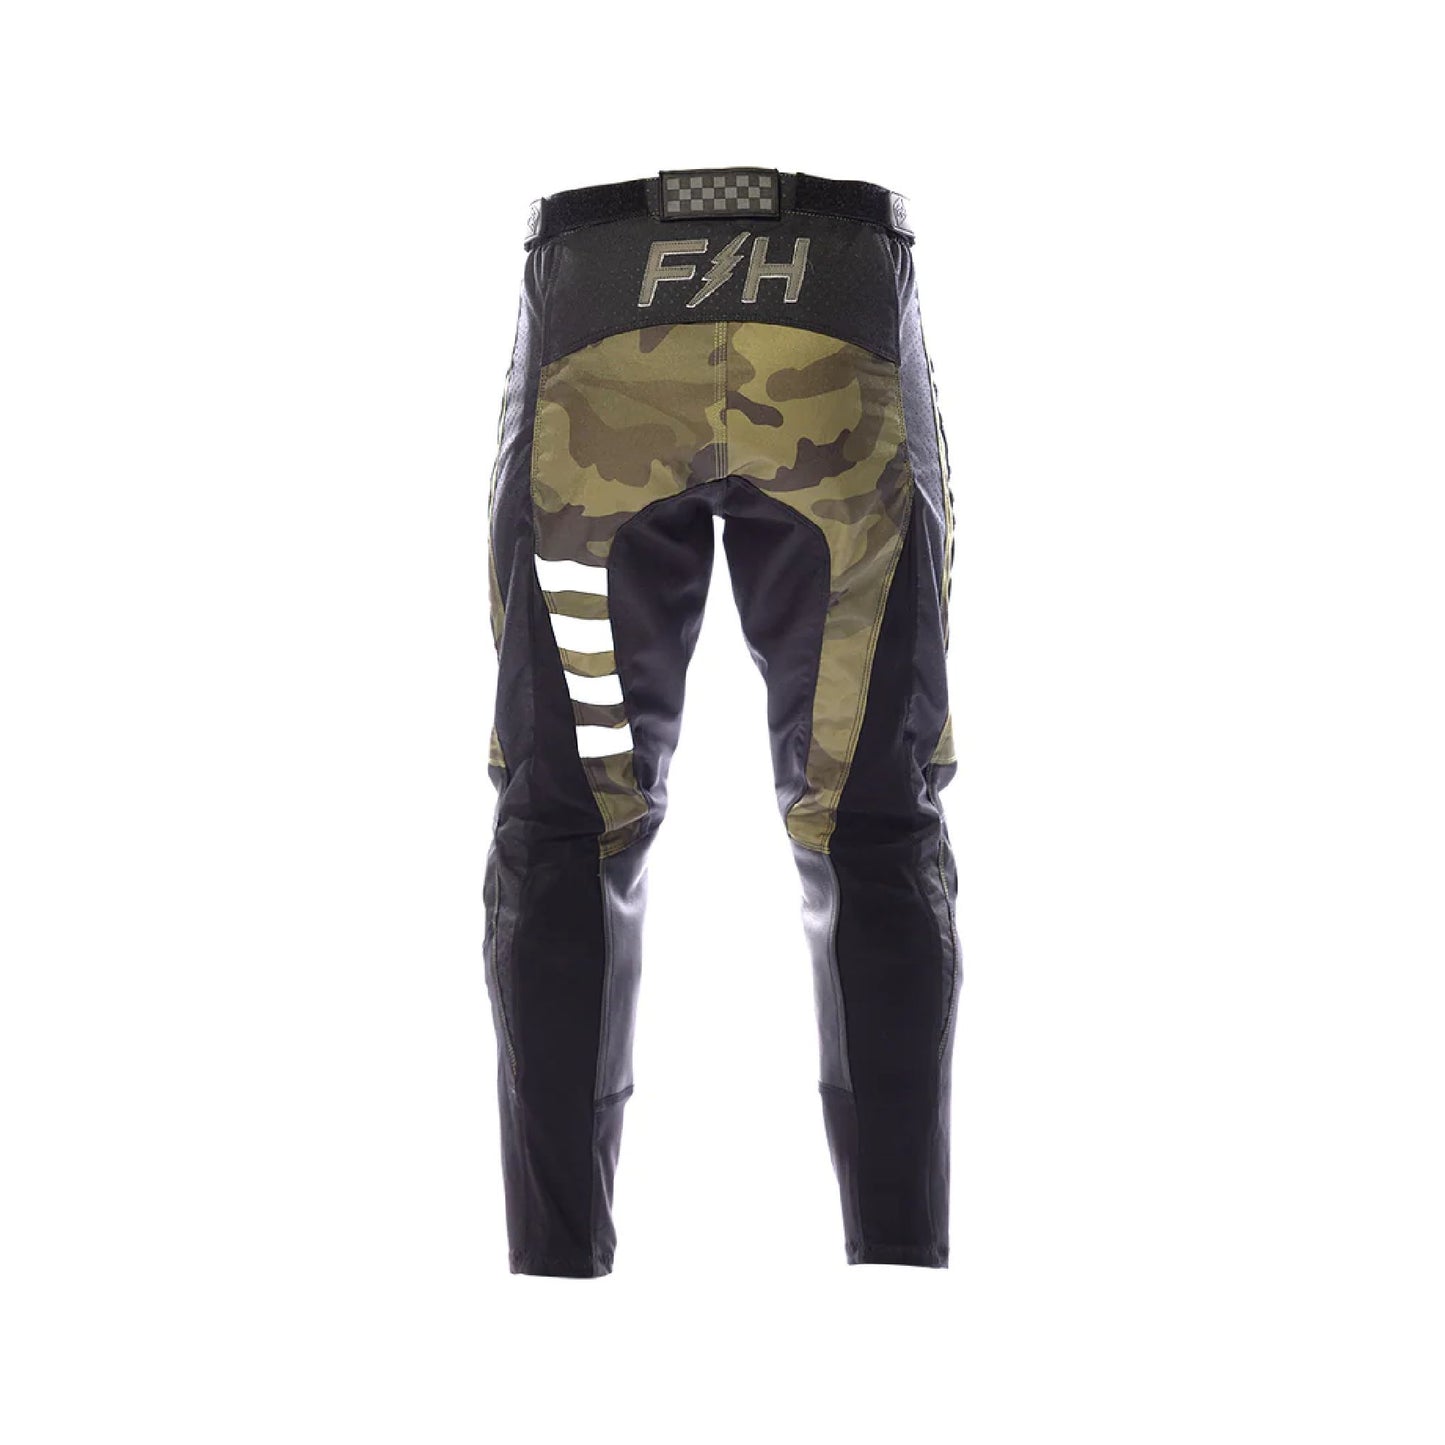 Fasthouse Youth Grindhouse Pants Camo Bike Pants